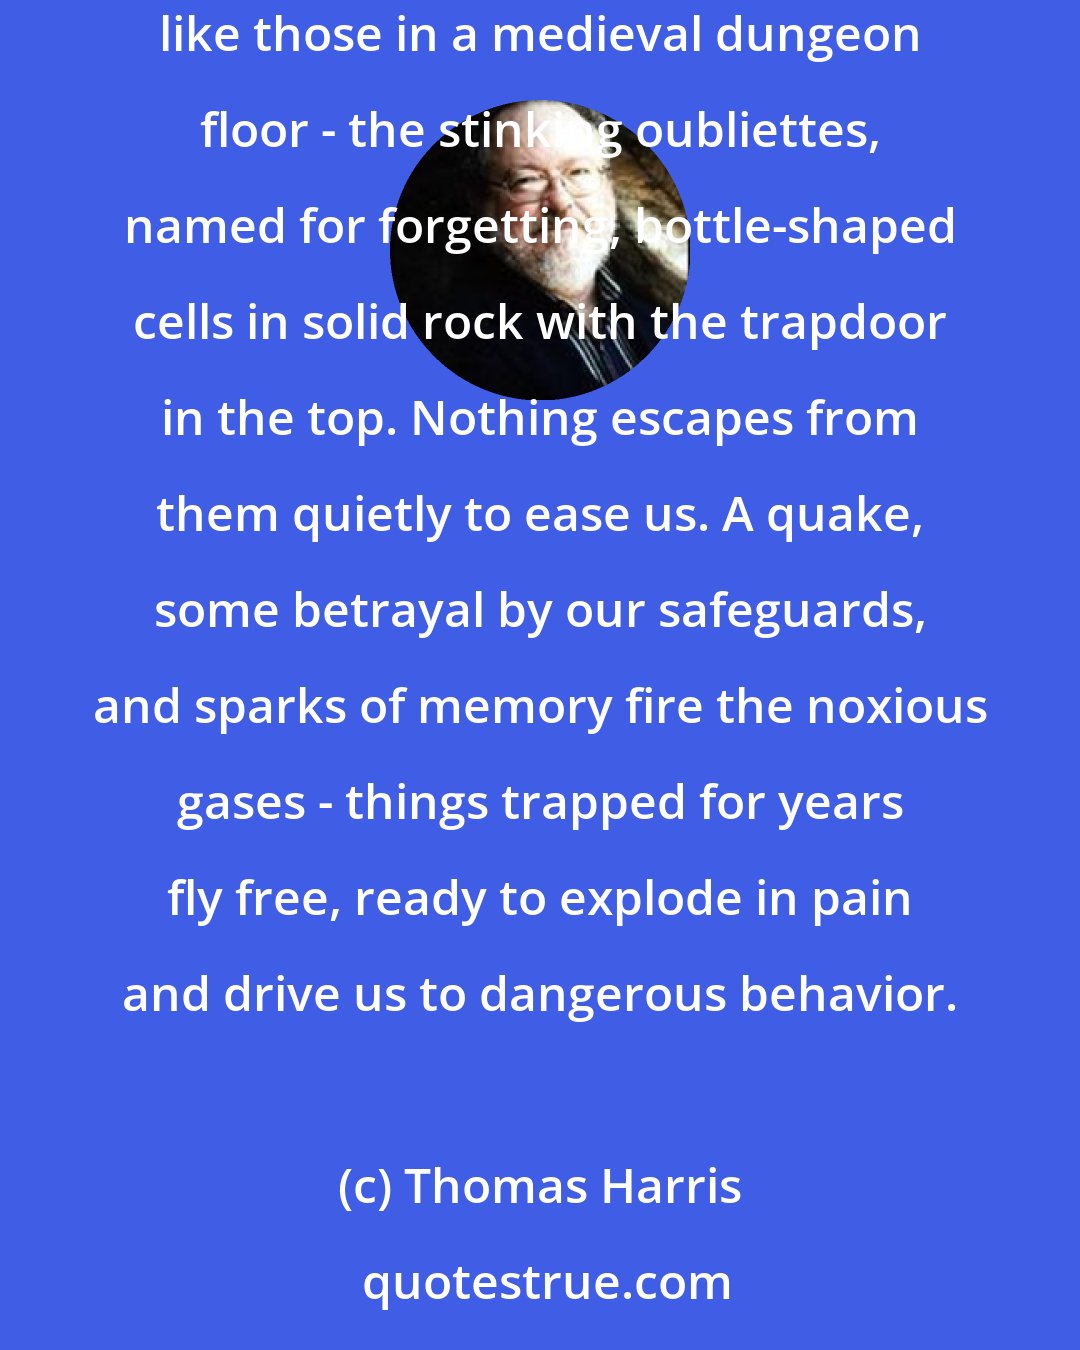 Thomas Harris: In the vaults of our hearts and brains, danger waits. All the chambers are not lovely, light and high. There are holes in the floor of the mind, like those in a medieval dungeon floor - the stinking oubliettes, named for forgetting, bottle-shaped cells in solid rock with the trapdoor in the top. Nothing escapes from them quietly to ease us. A quake, some betrayal by our safeguards, and sparks of memory fire the noxious gases - things trapped for years fly free, ready to explode in pain and drive us to dangerous behavior.